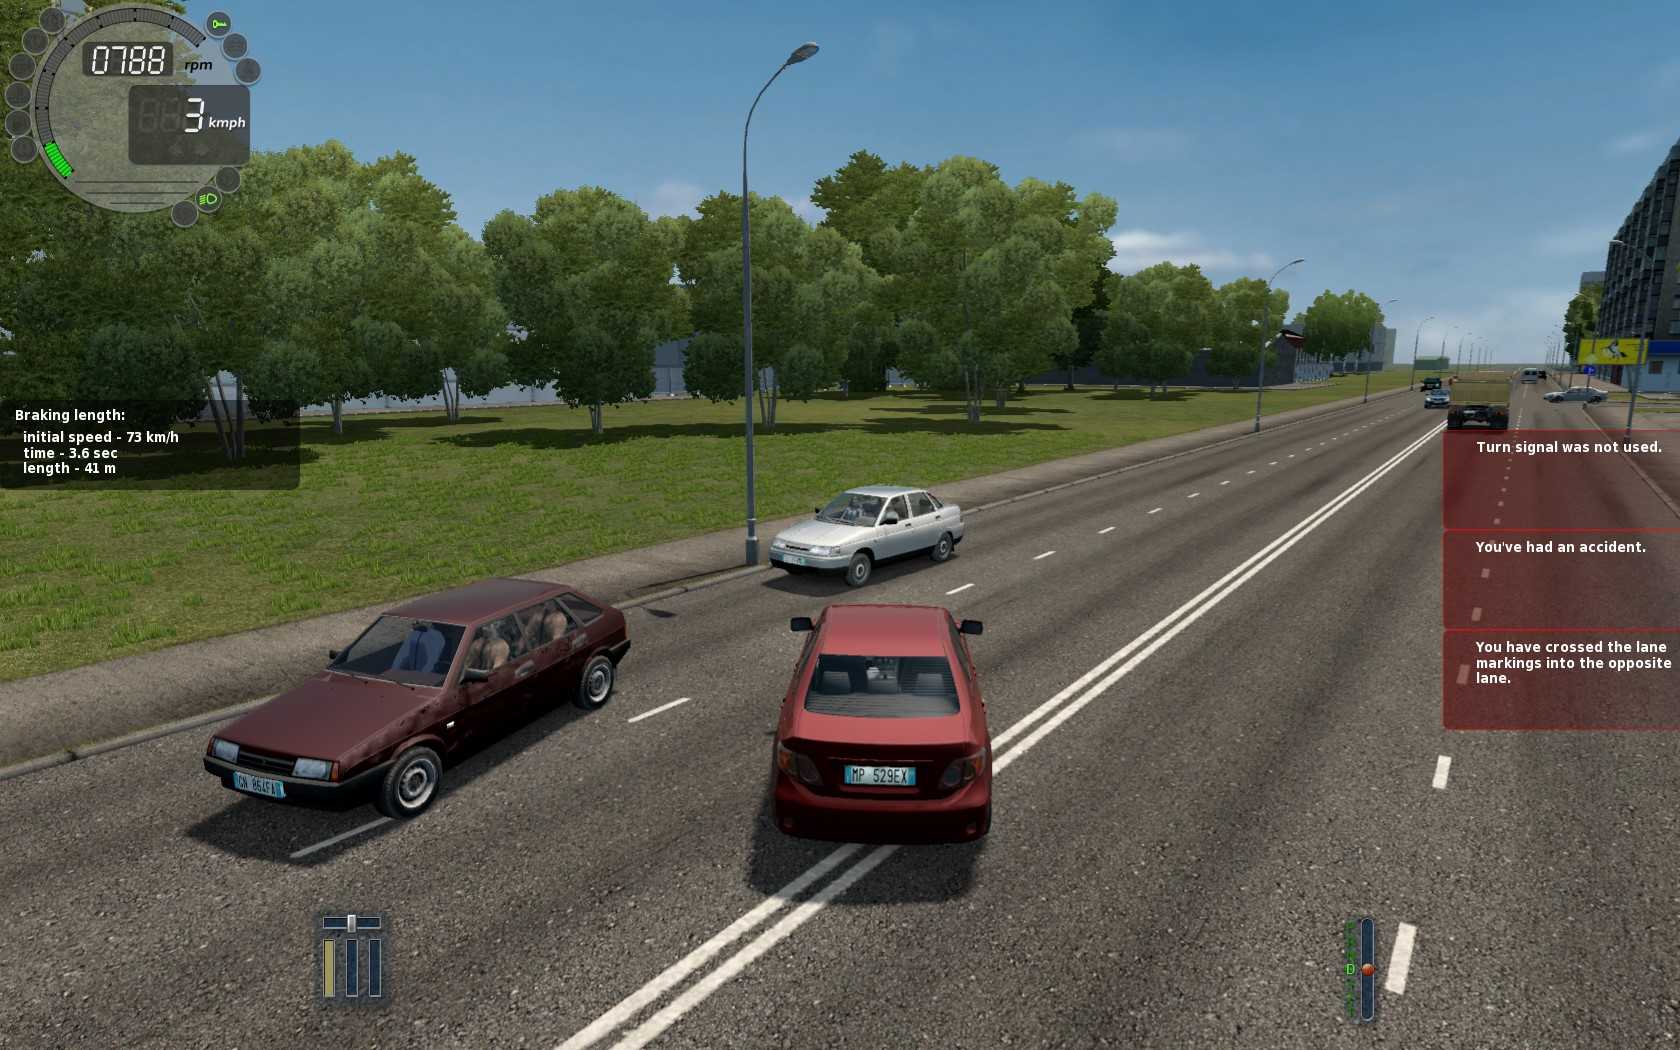 При запуске city car driving. City car Driving системные требования. Ошибка City car Driving nmesh2 could not open file. Exception profileserver: DB Version is unsupported due to being too High Сити кар драйвинг ошибка.